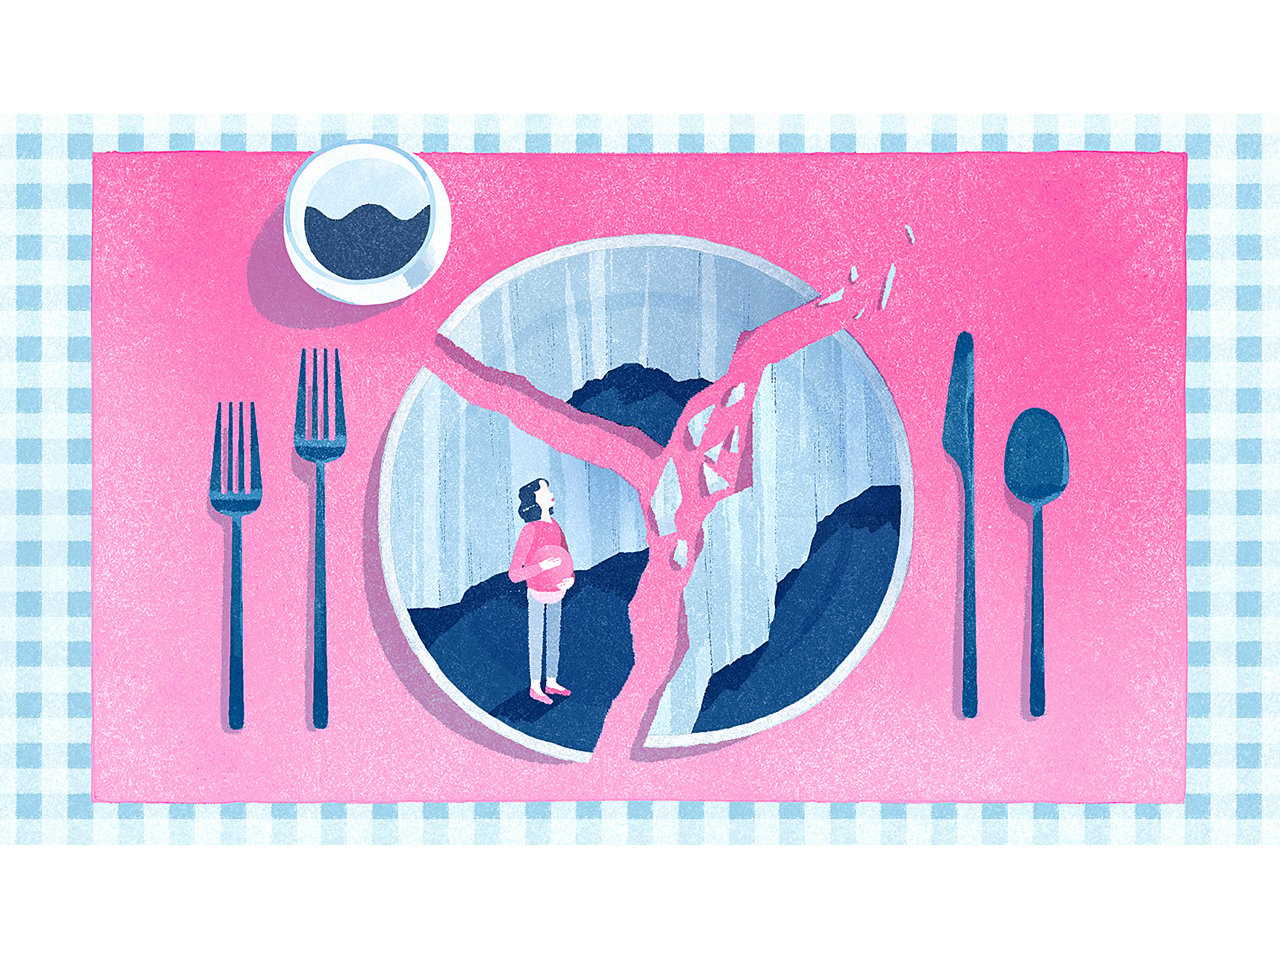 illustration of table setting with a smashed dinner plate. On the palt is an image of a pregnant woman looking up at the crack